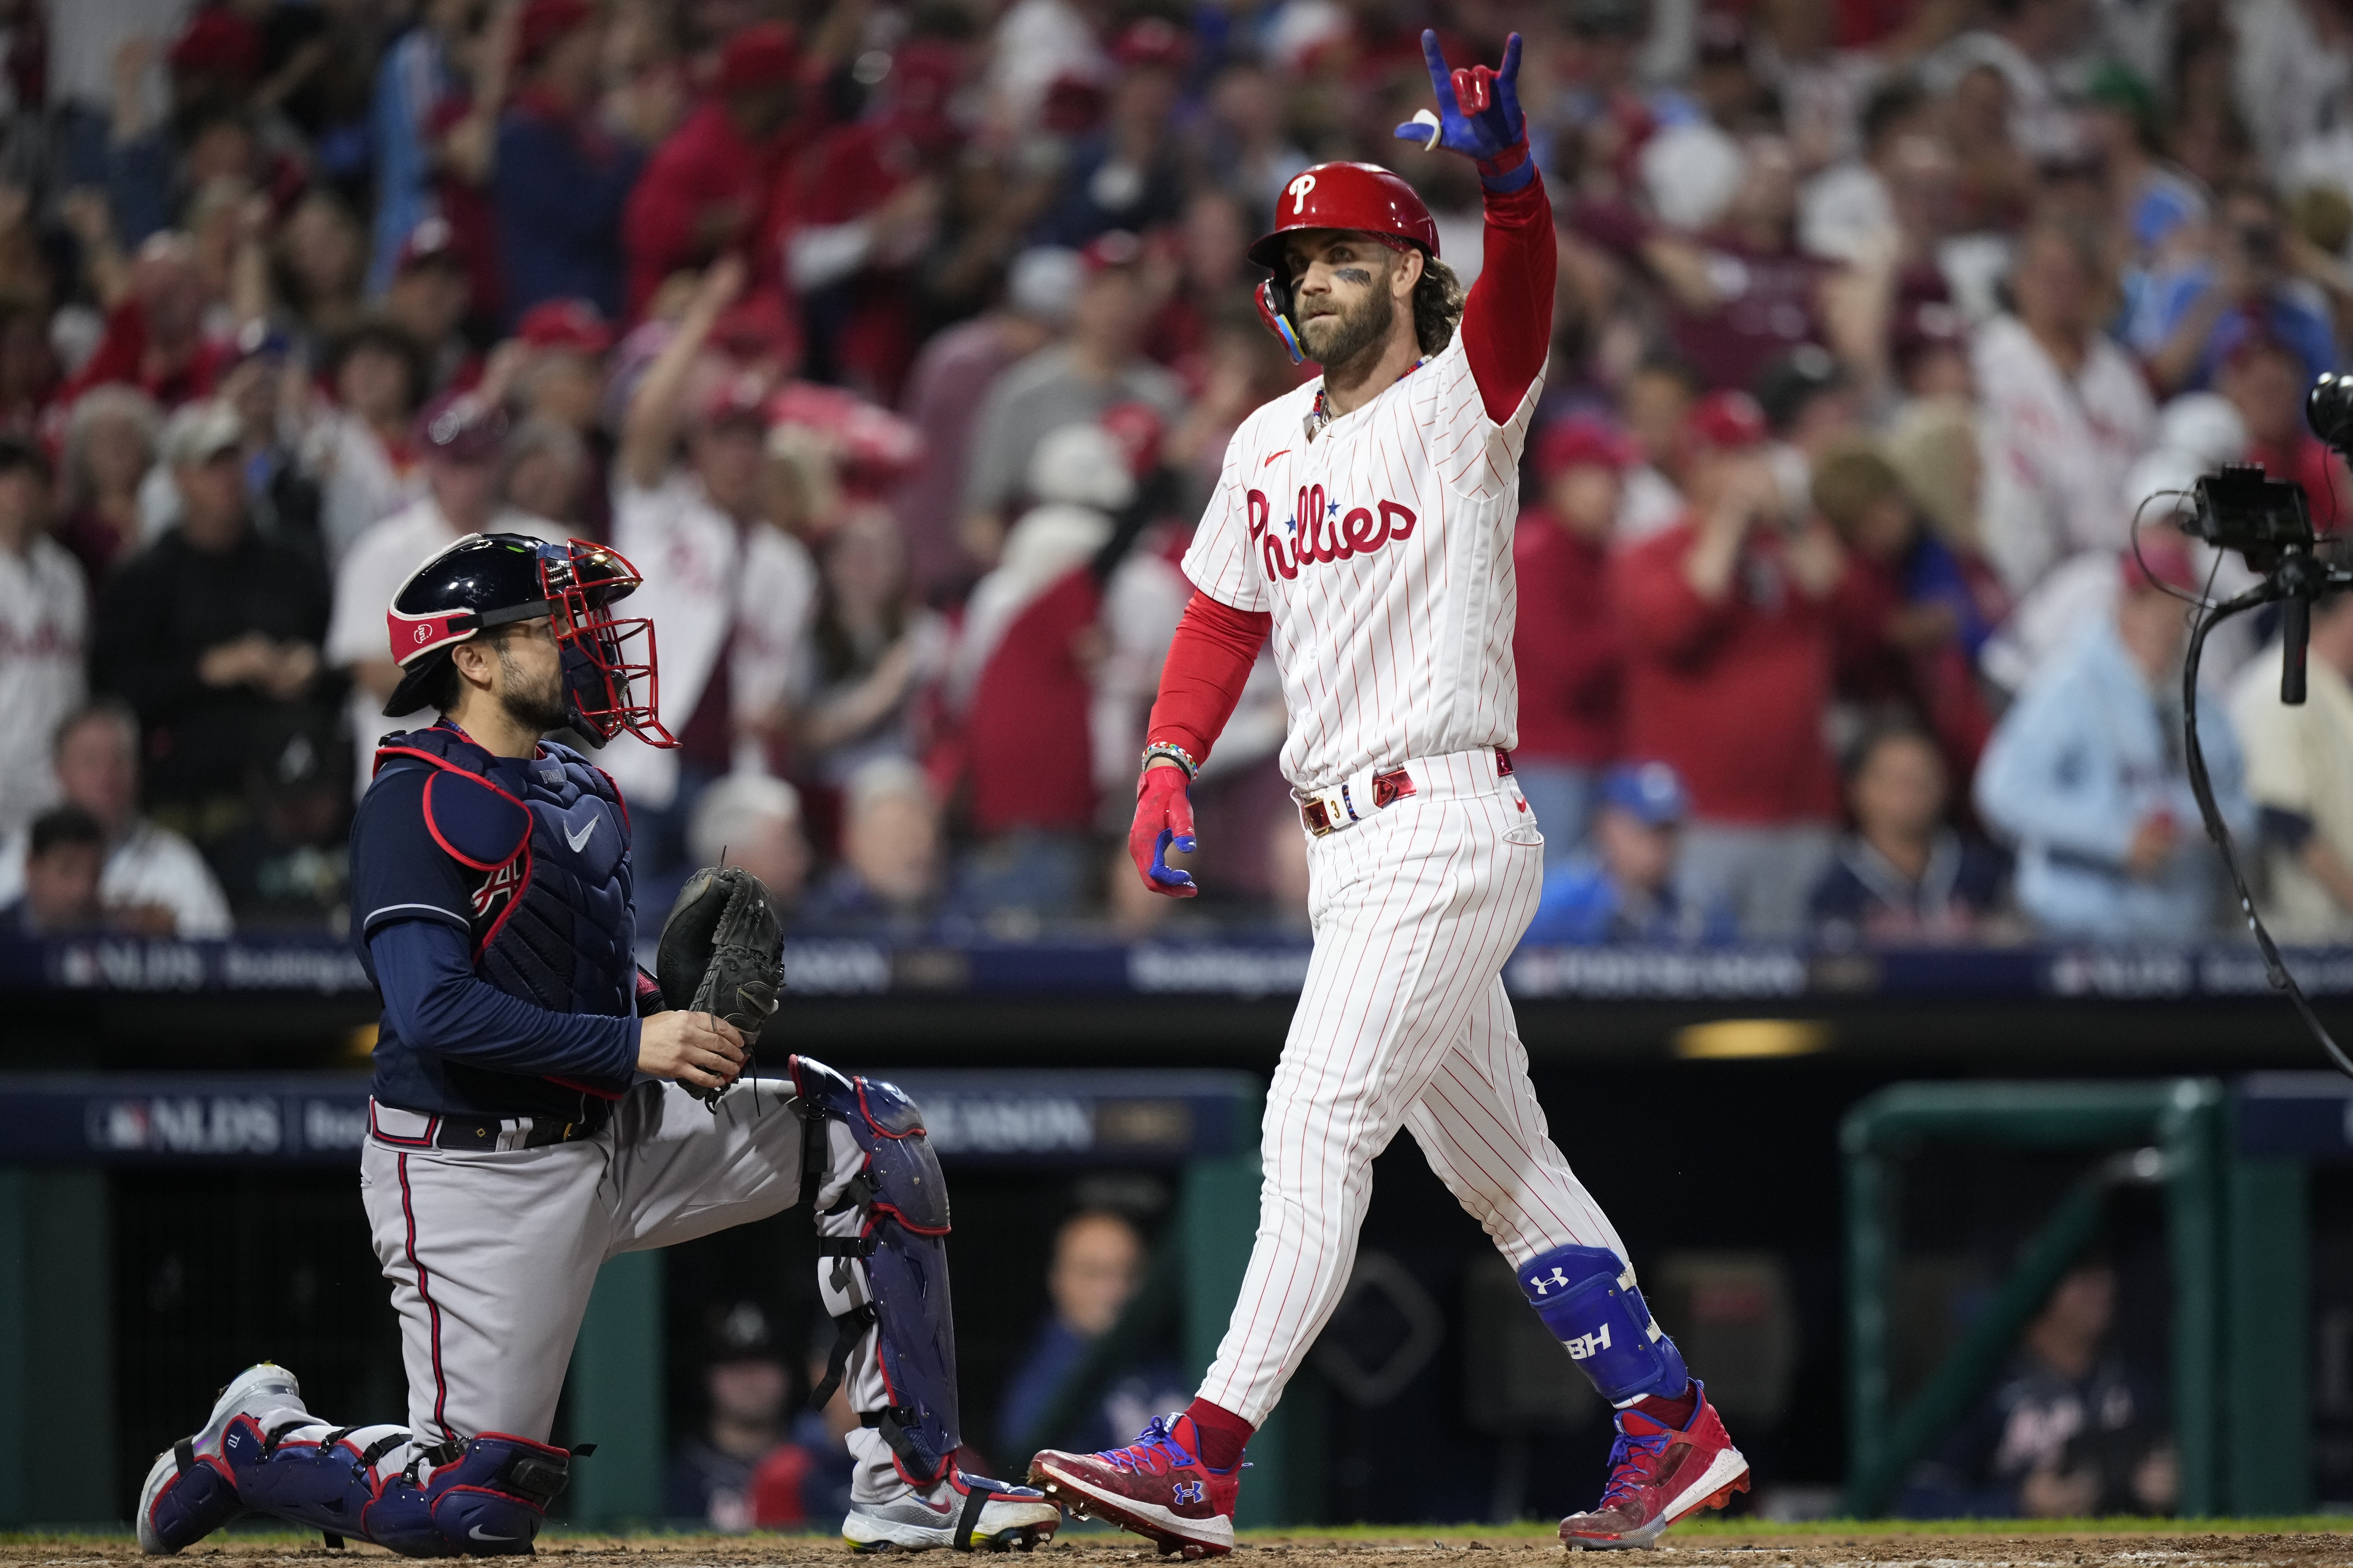 Phillies pounded to death by Braves while wearing ridiculous